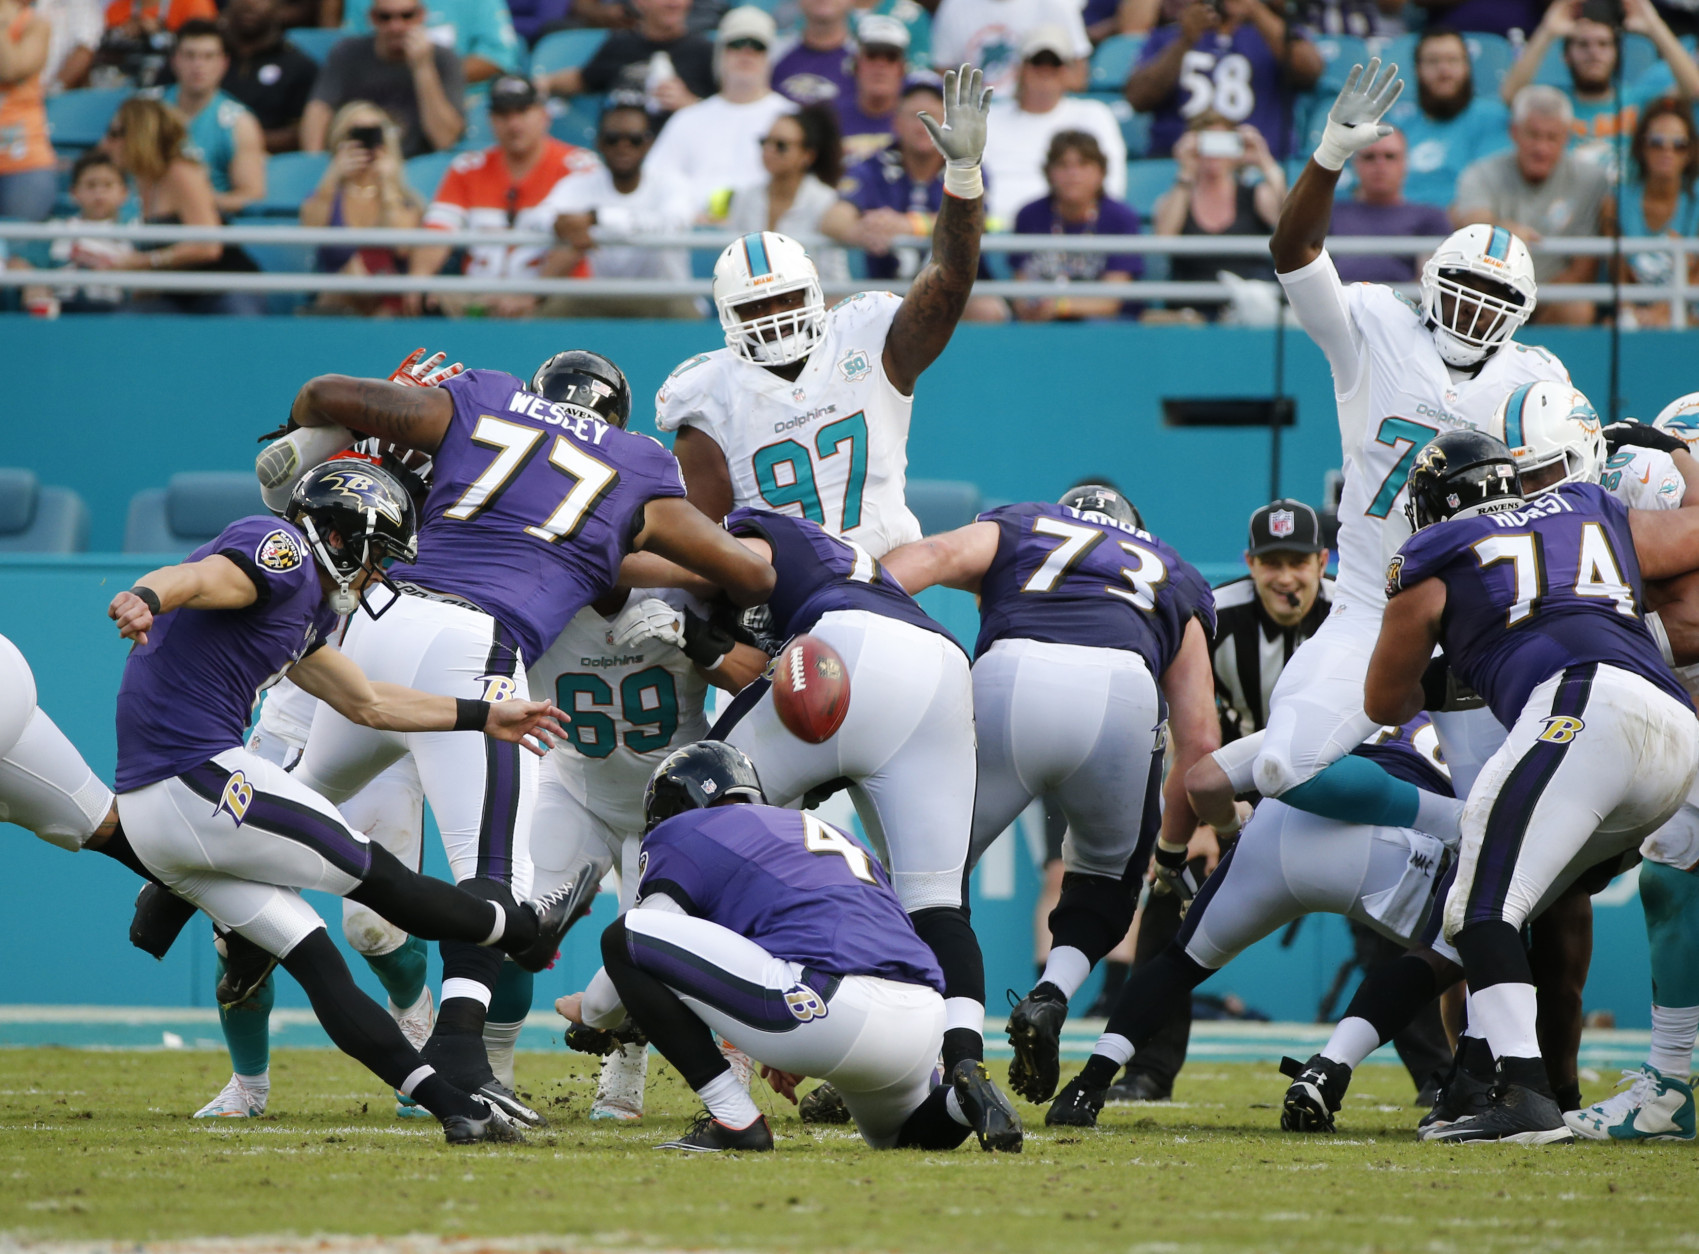 Baltimore Ravens kicker Justin Tucker (9) scores a field goal during the first half of an NFL football game against the Miami Dolphins, Sunday, Dec. 6, 2015, in Miami Gardens, Fla.  (AP Photo/Wilfredo Lee)